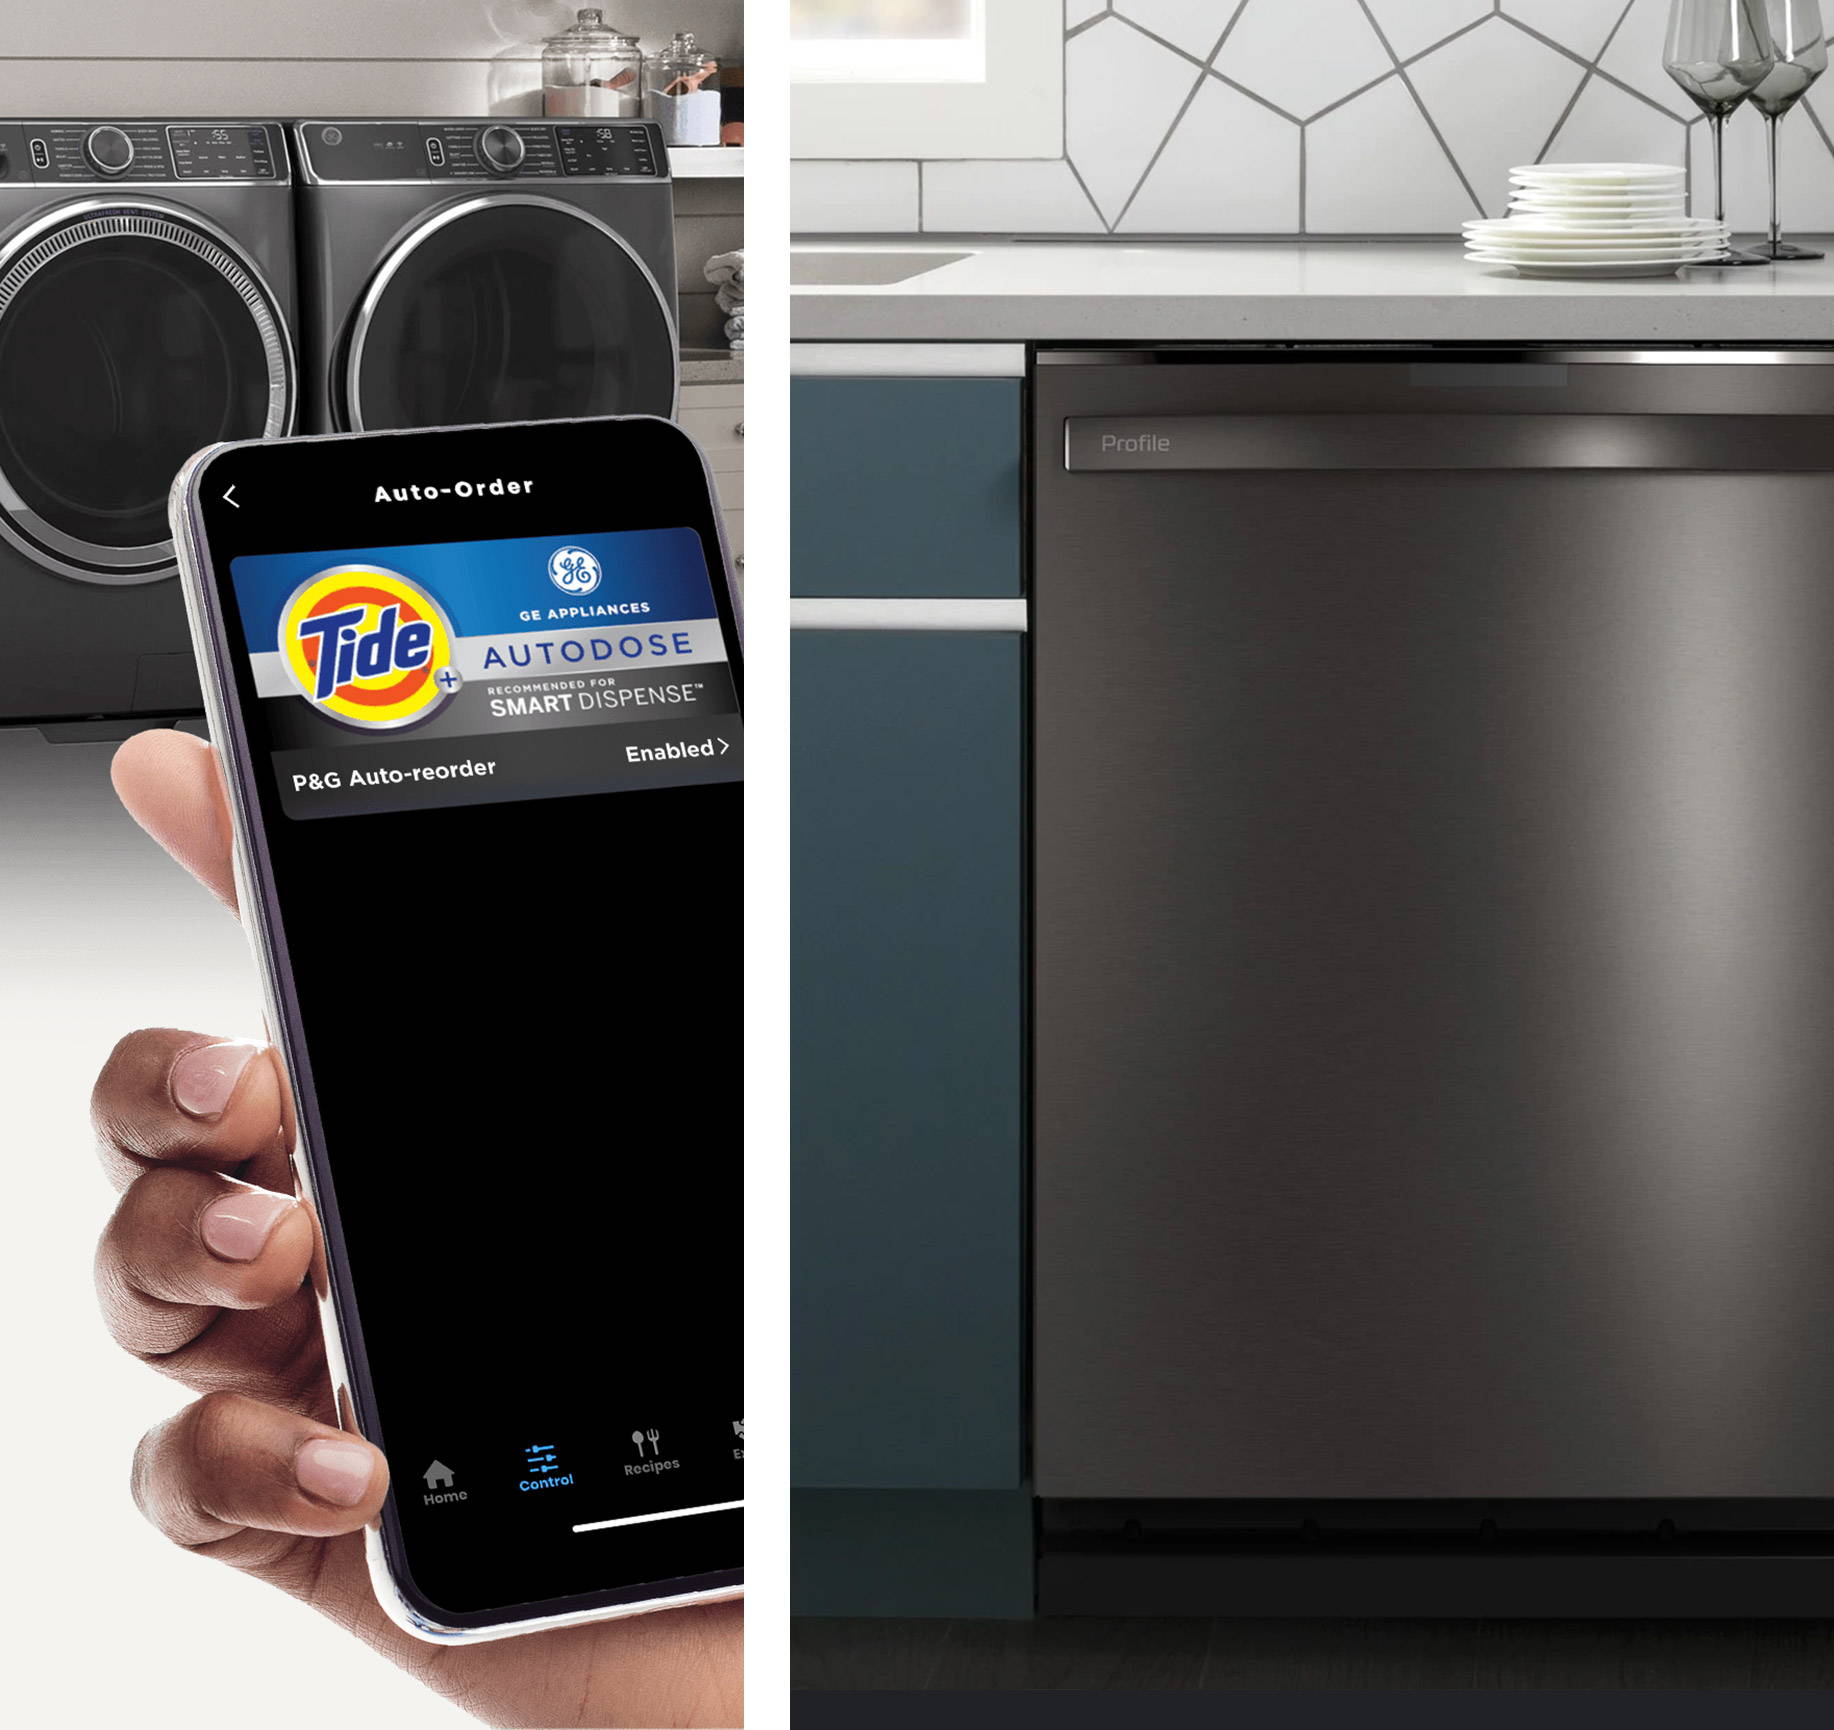 Grid image of hand holding smartphone auto-ordering Tide detergent, and black stainless dishwasher installed.